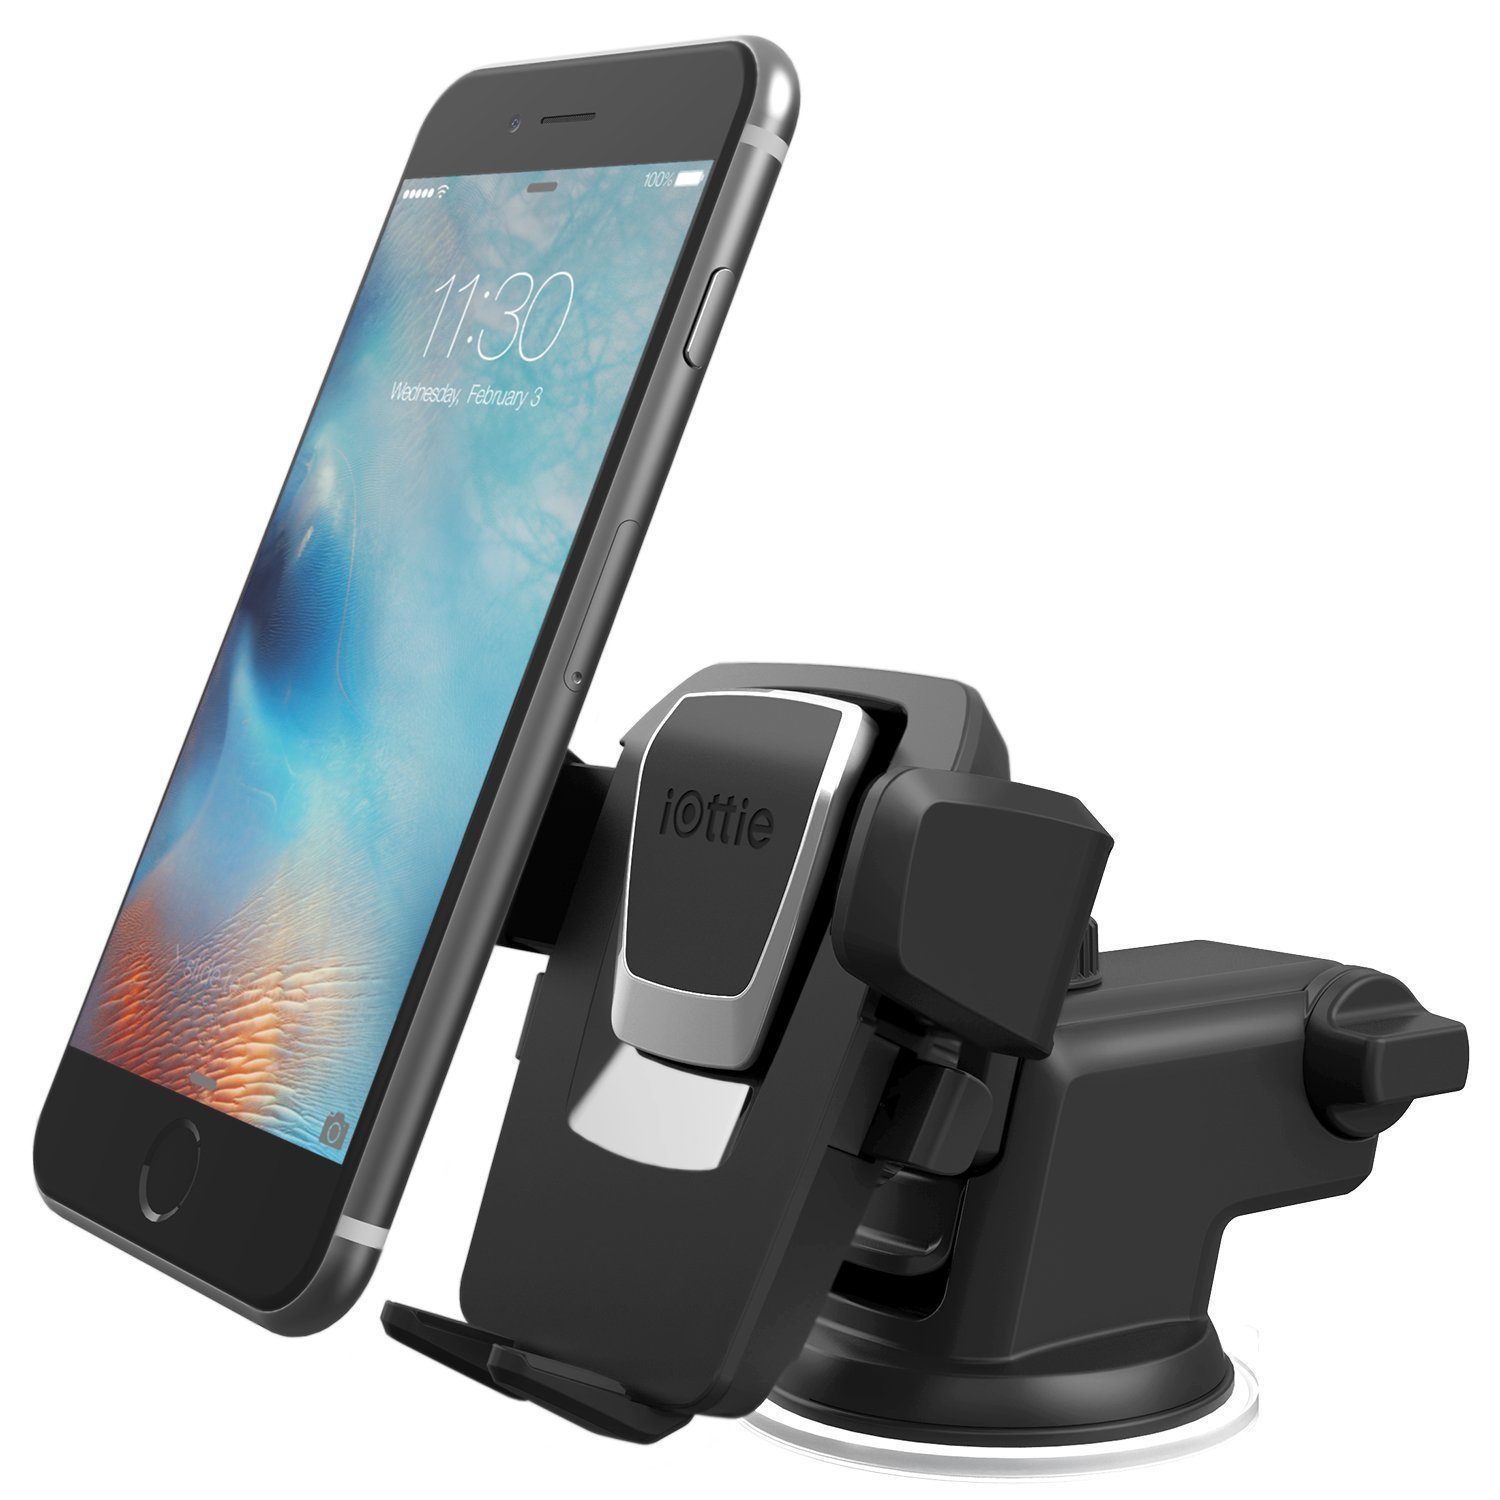 iOttie easy one touch car mount